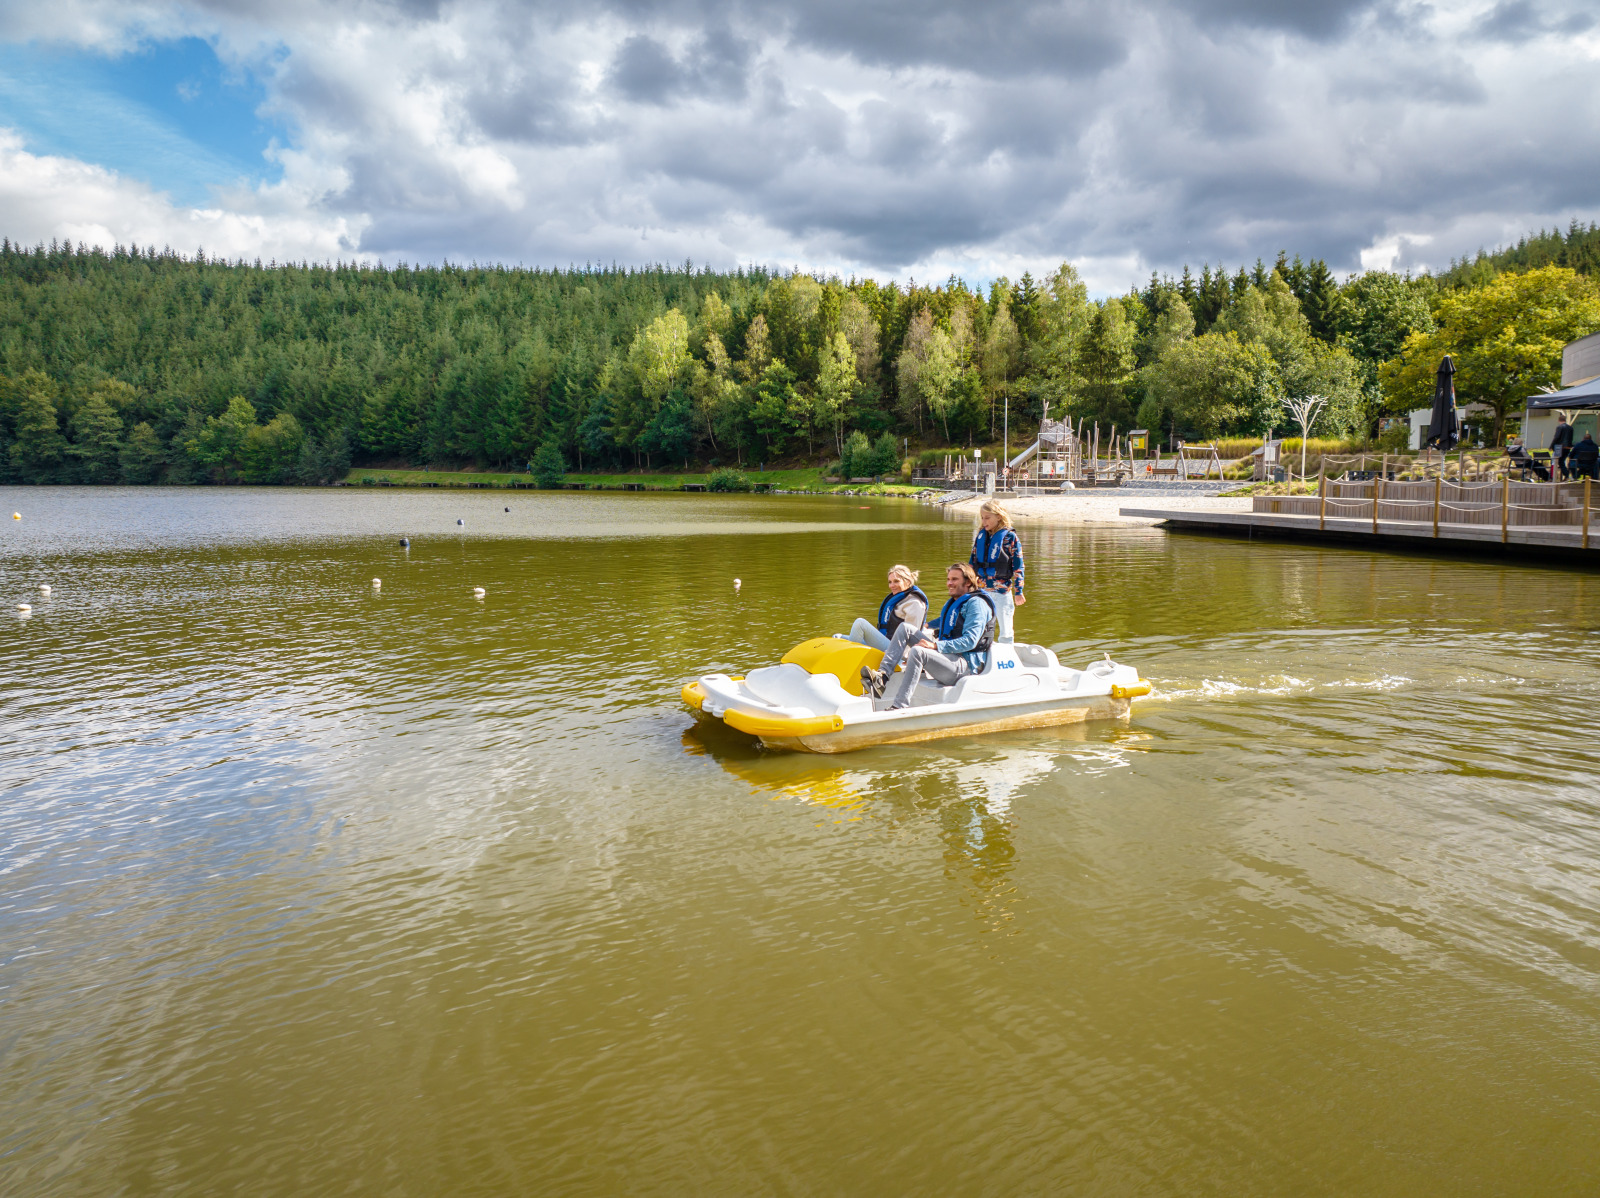 Pedal boat by the Landal Glamping Neufchâteau in the Haute-Sûre Forêt d’Anlier nature park